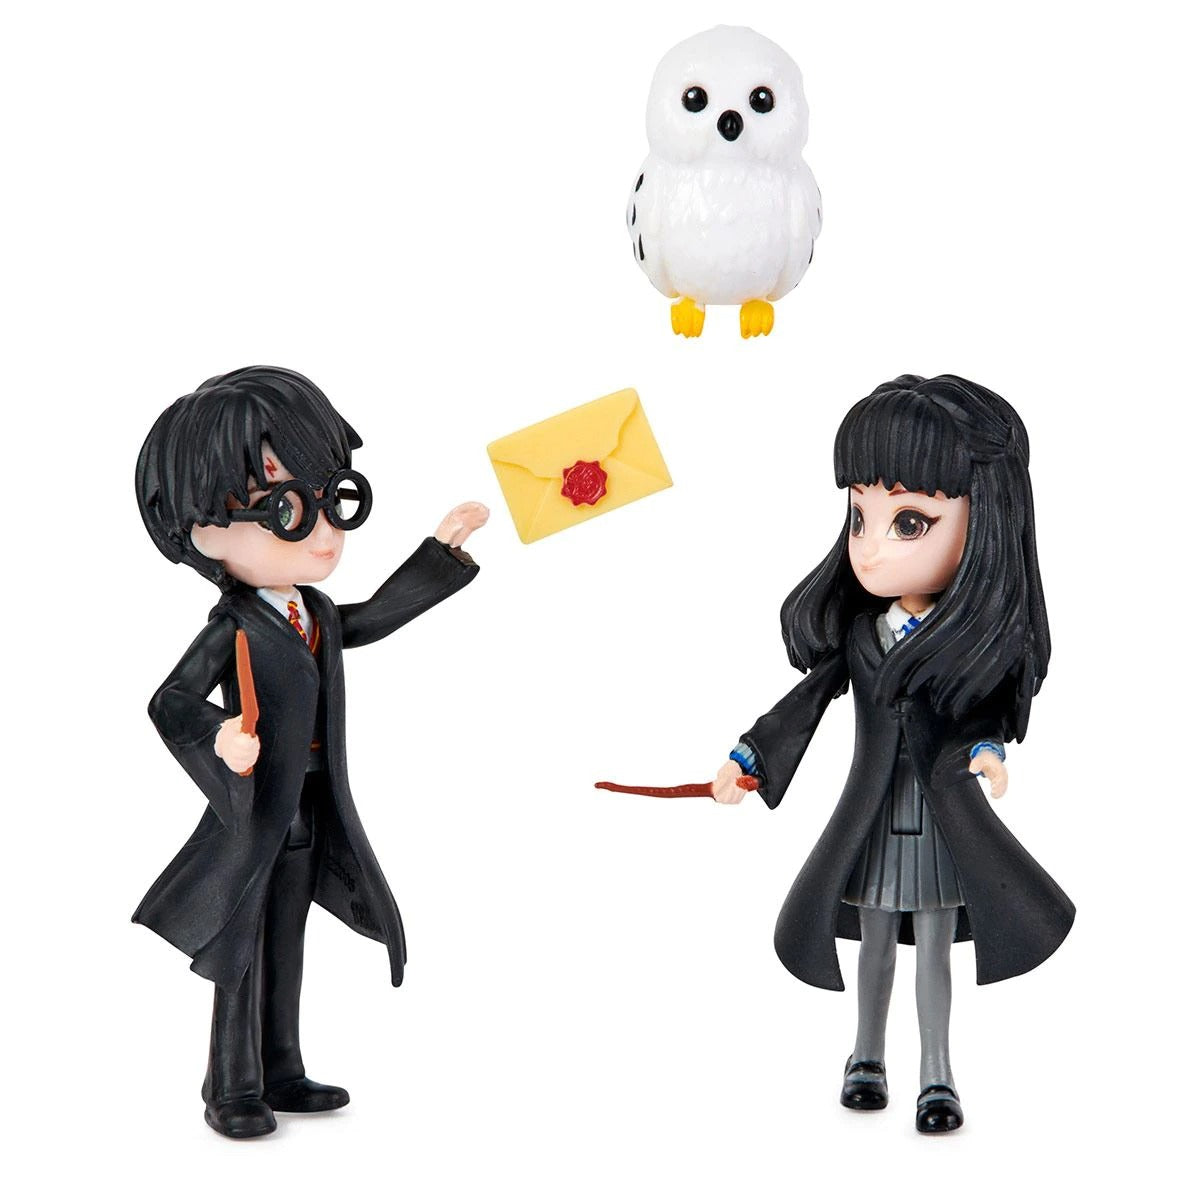 Wizarding World: Harry Potter Mini Pack Figuras Magicas - Harry Y Cho